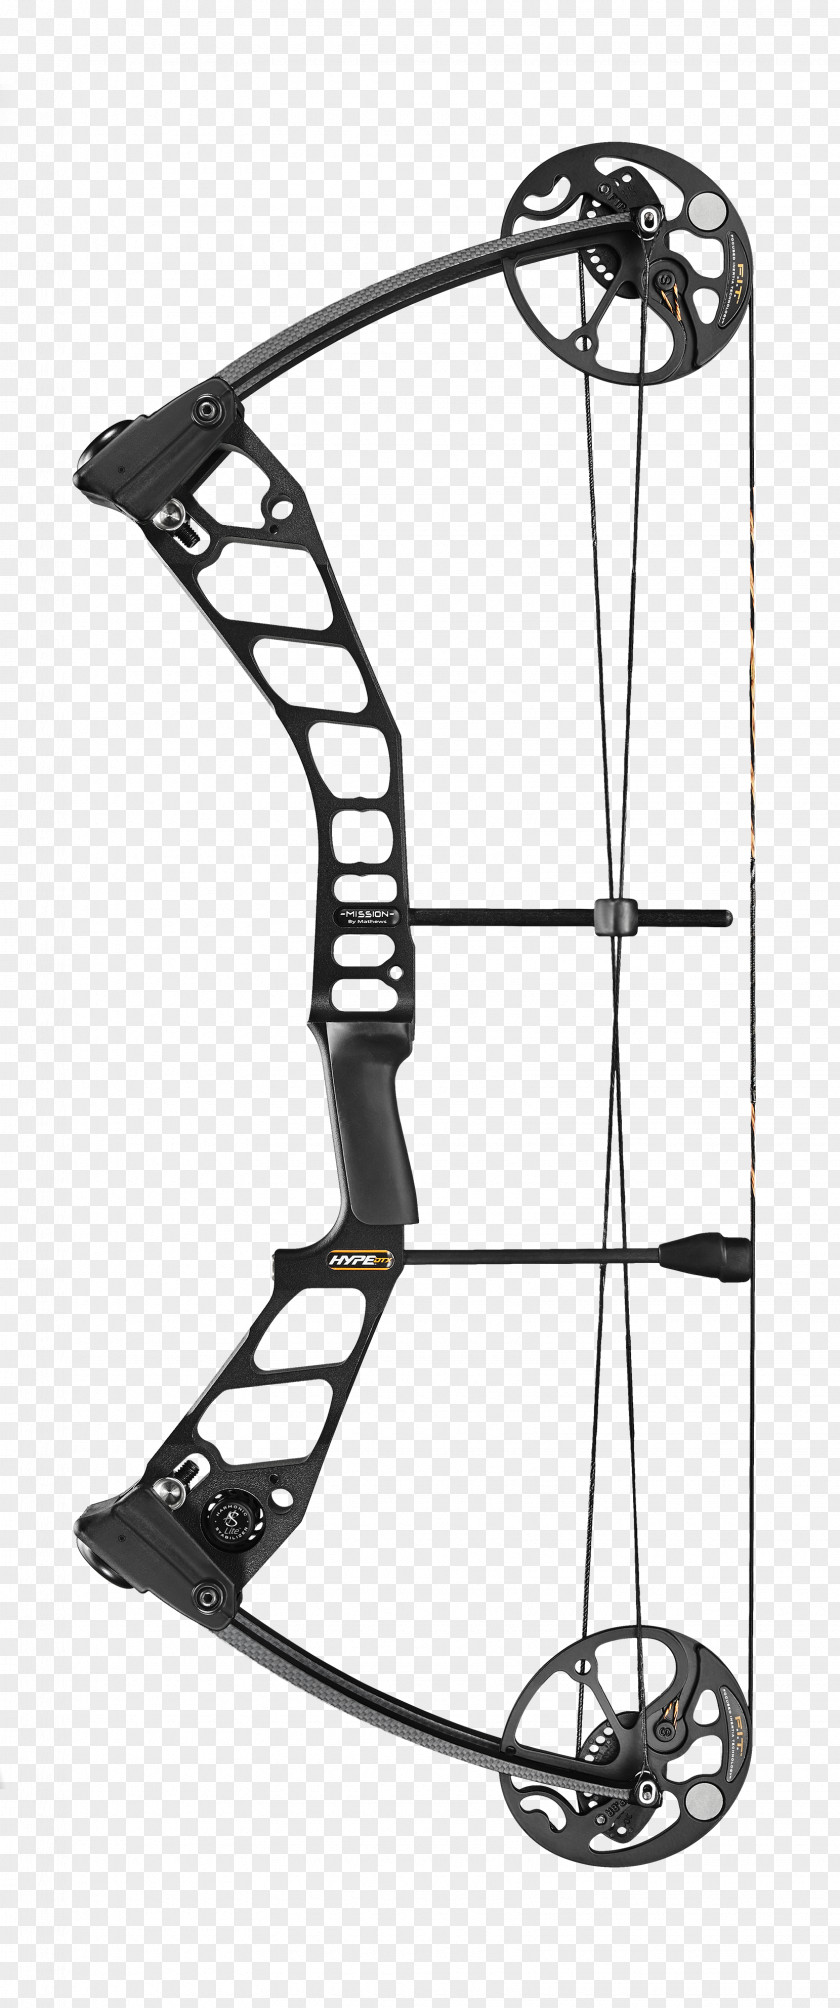 Arrow Bow Archery Country Compound Bows And Hunting PNG